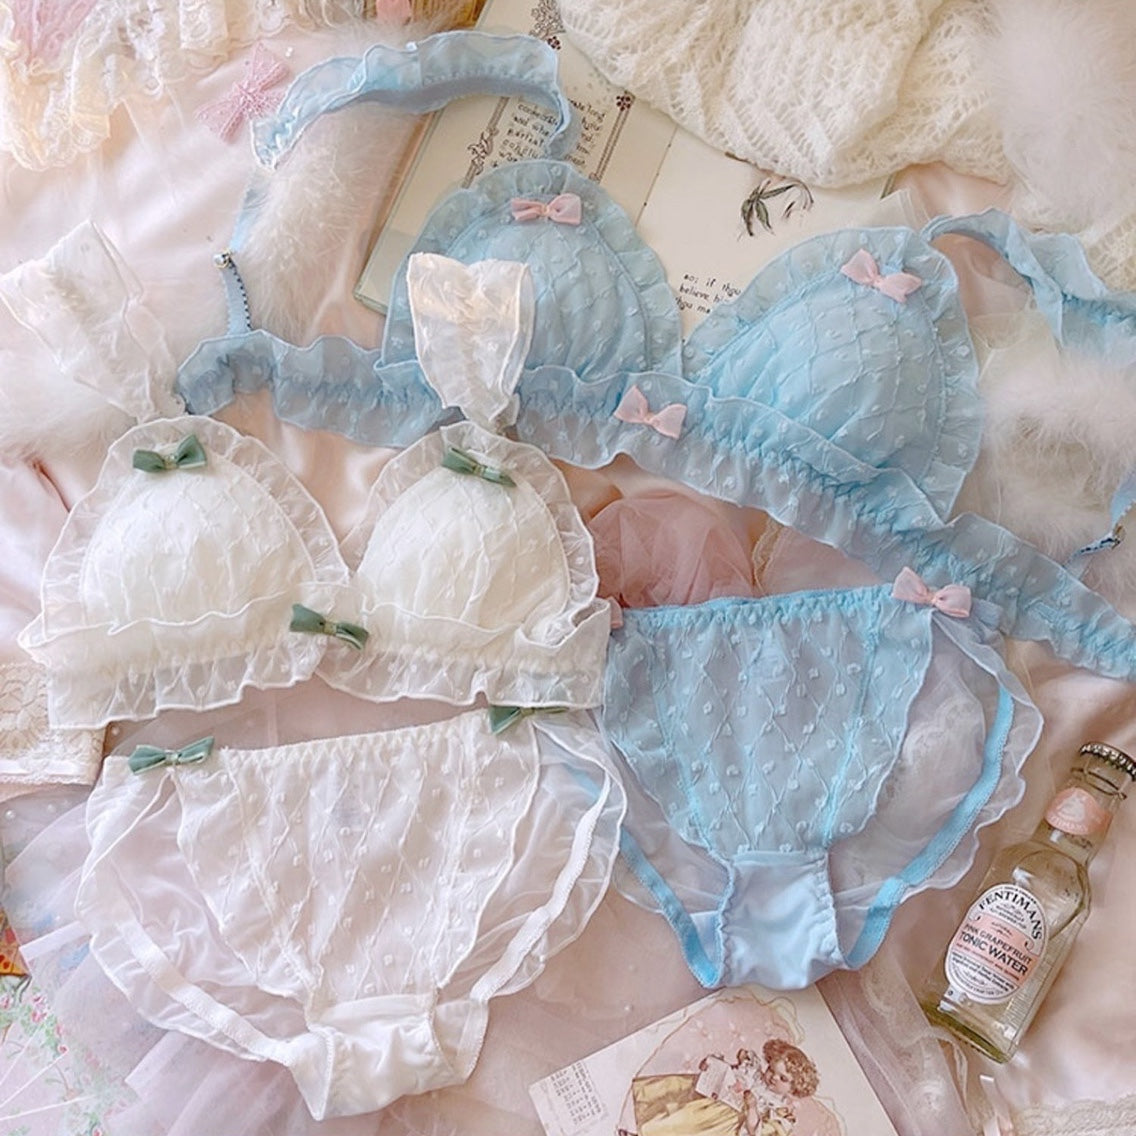 Doll Underwear, Doll Lingerie, Bra and Panties -  Canada